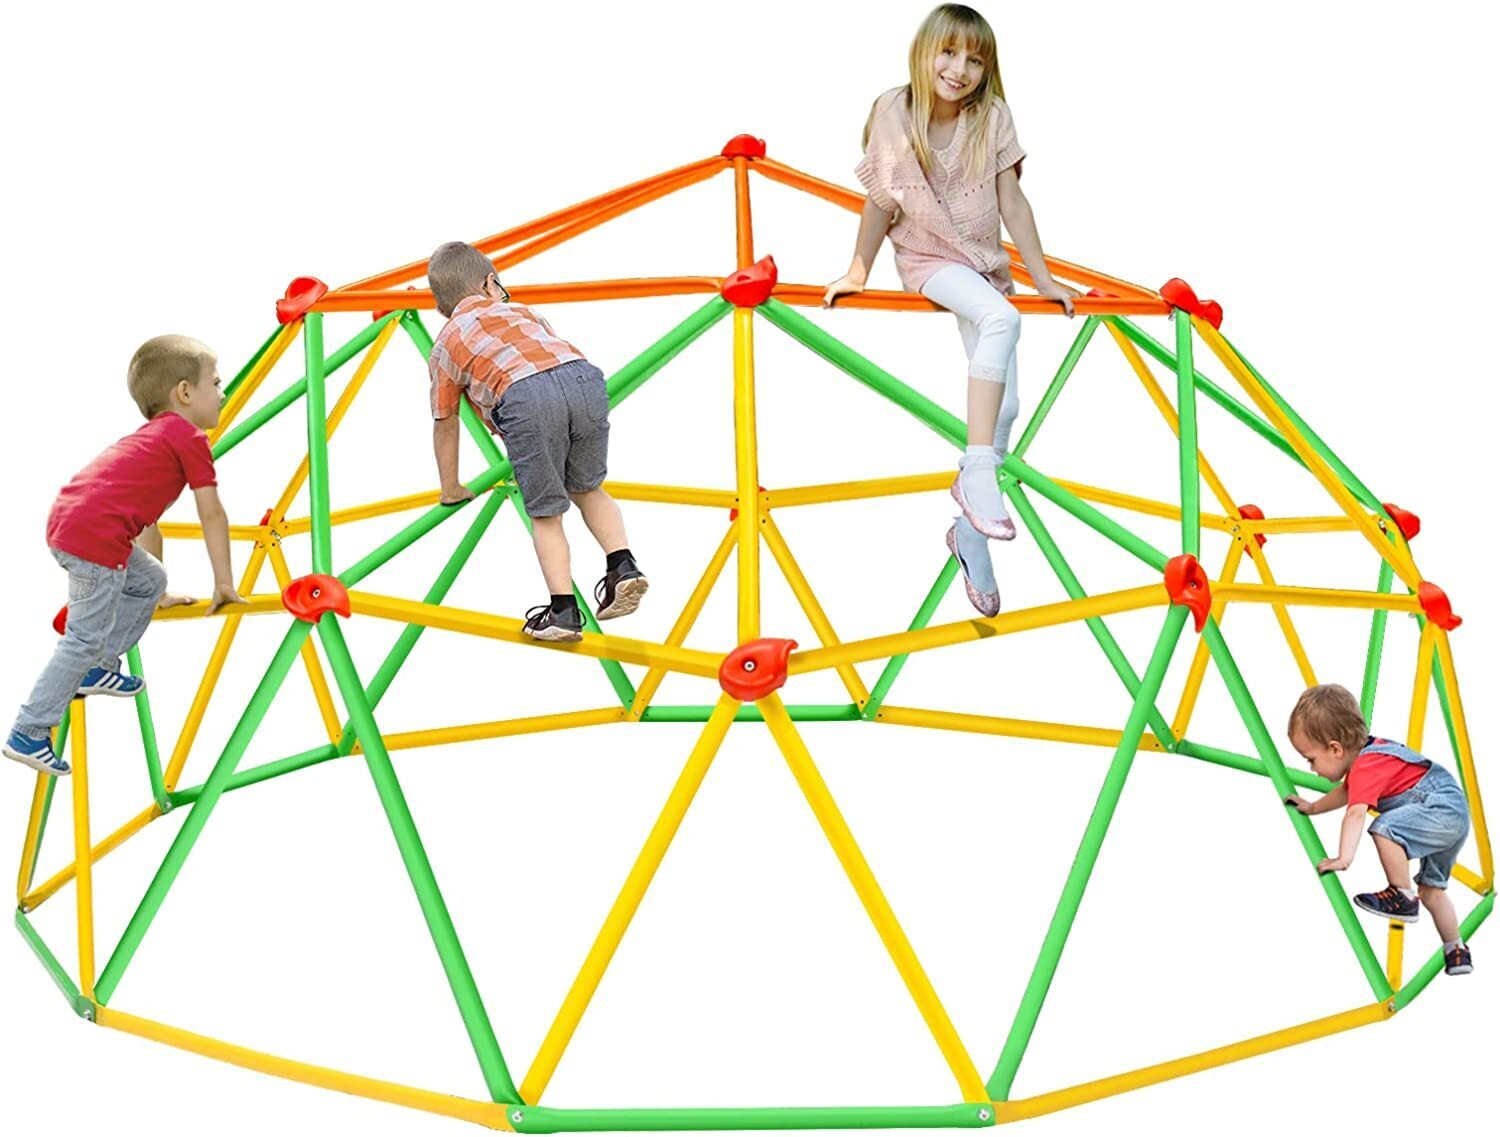 Metal monkey bars in a dome design